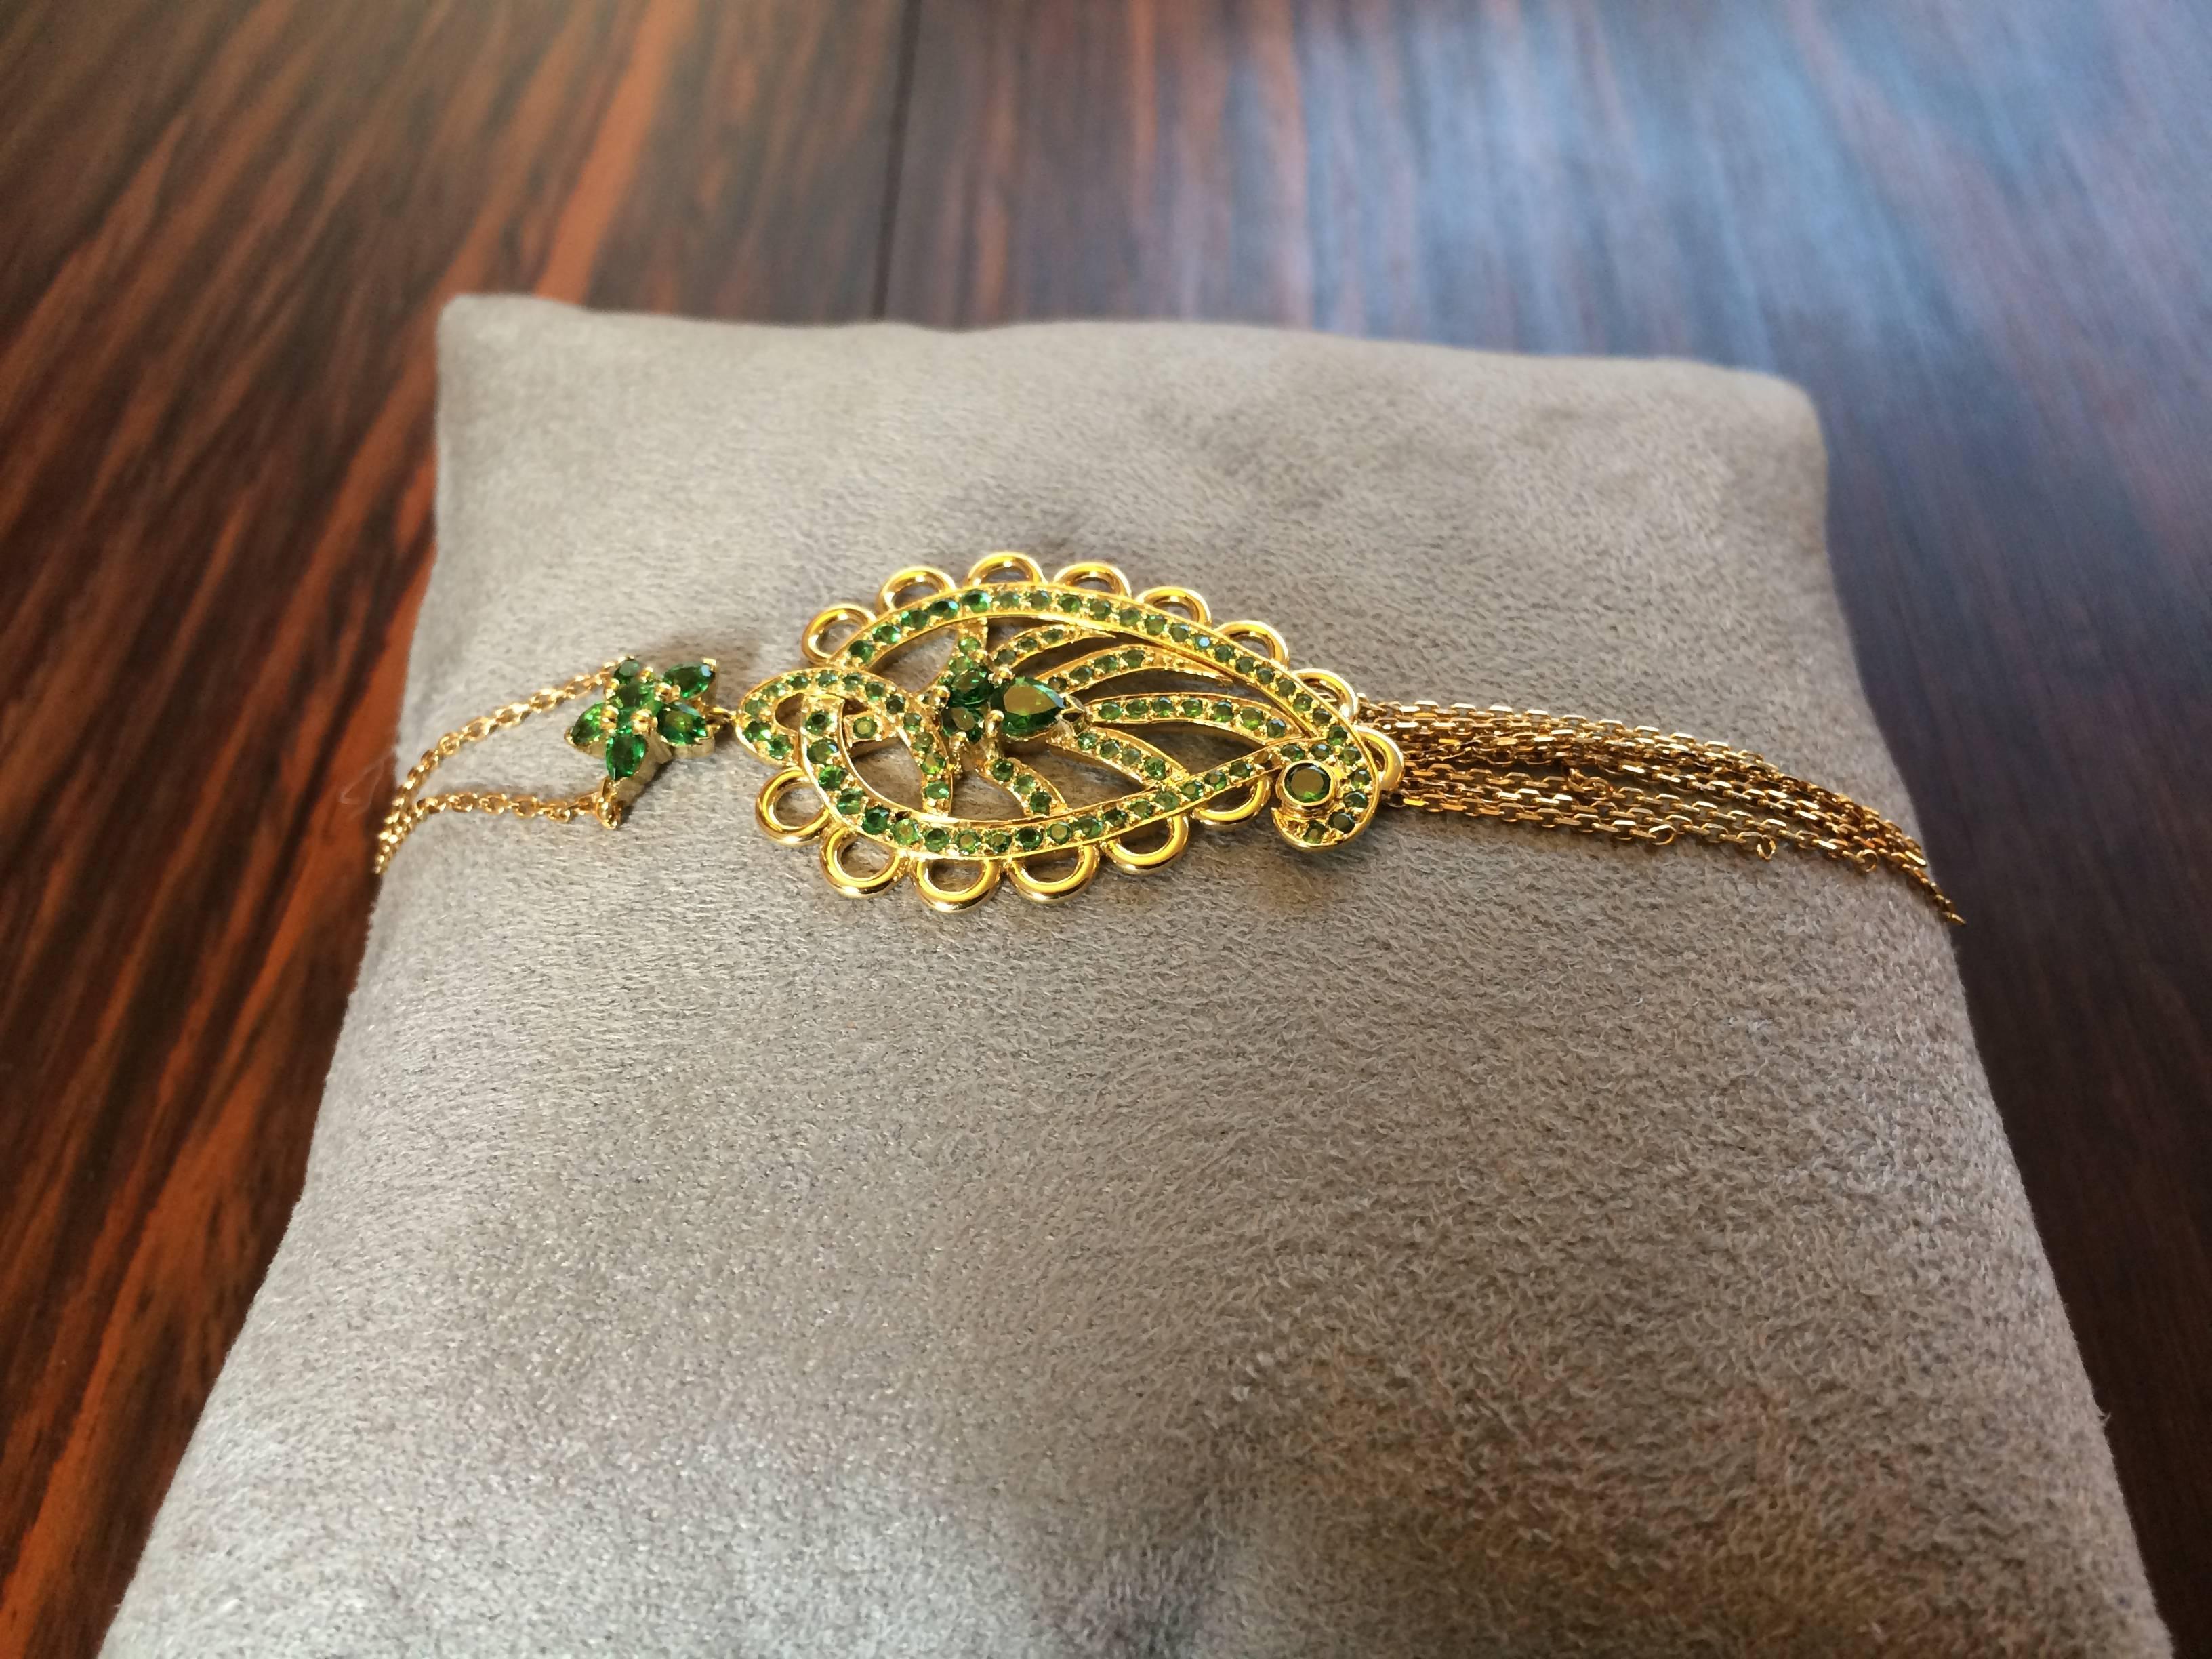 The pendant is handcrafted from 18ct yellow gold and is set with 1.30ct natural tsavorites. 

Diameter: 2.3cm
Length at longest point: 7.8cm
The chain length is 51cm or 20 inches and can be altered to suit.

This beautiful pendant is part of Ana de